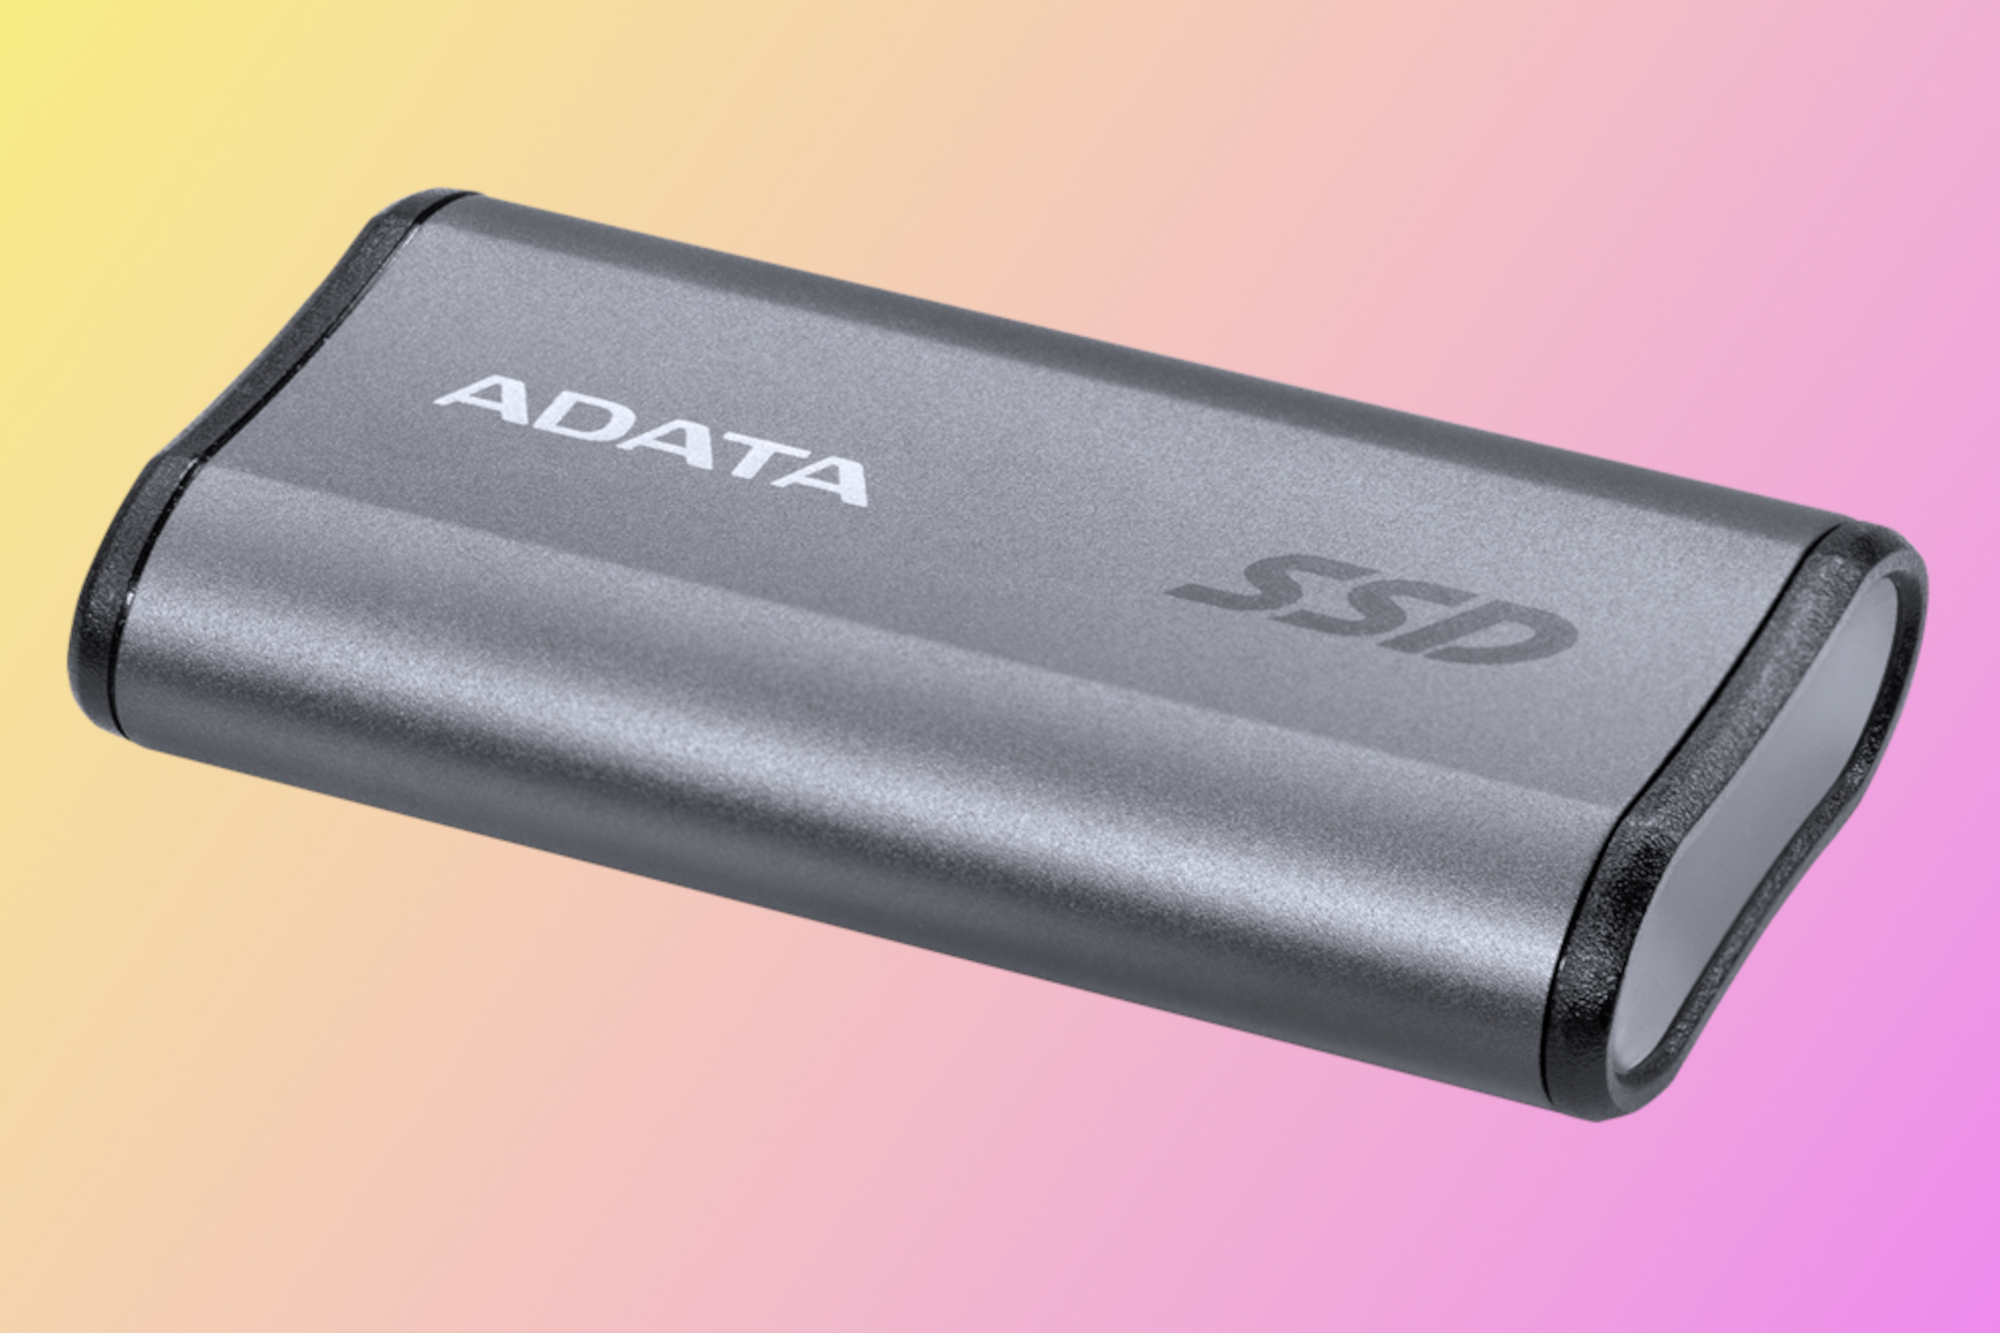 Adata Elite SE880 SSD - the most portable external SSD for gaming